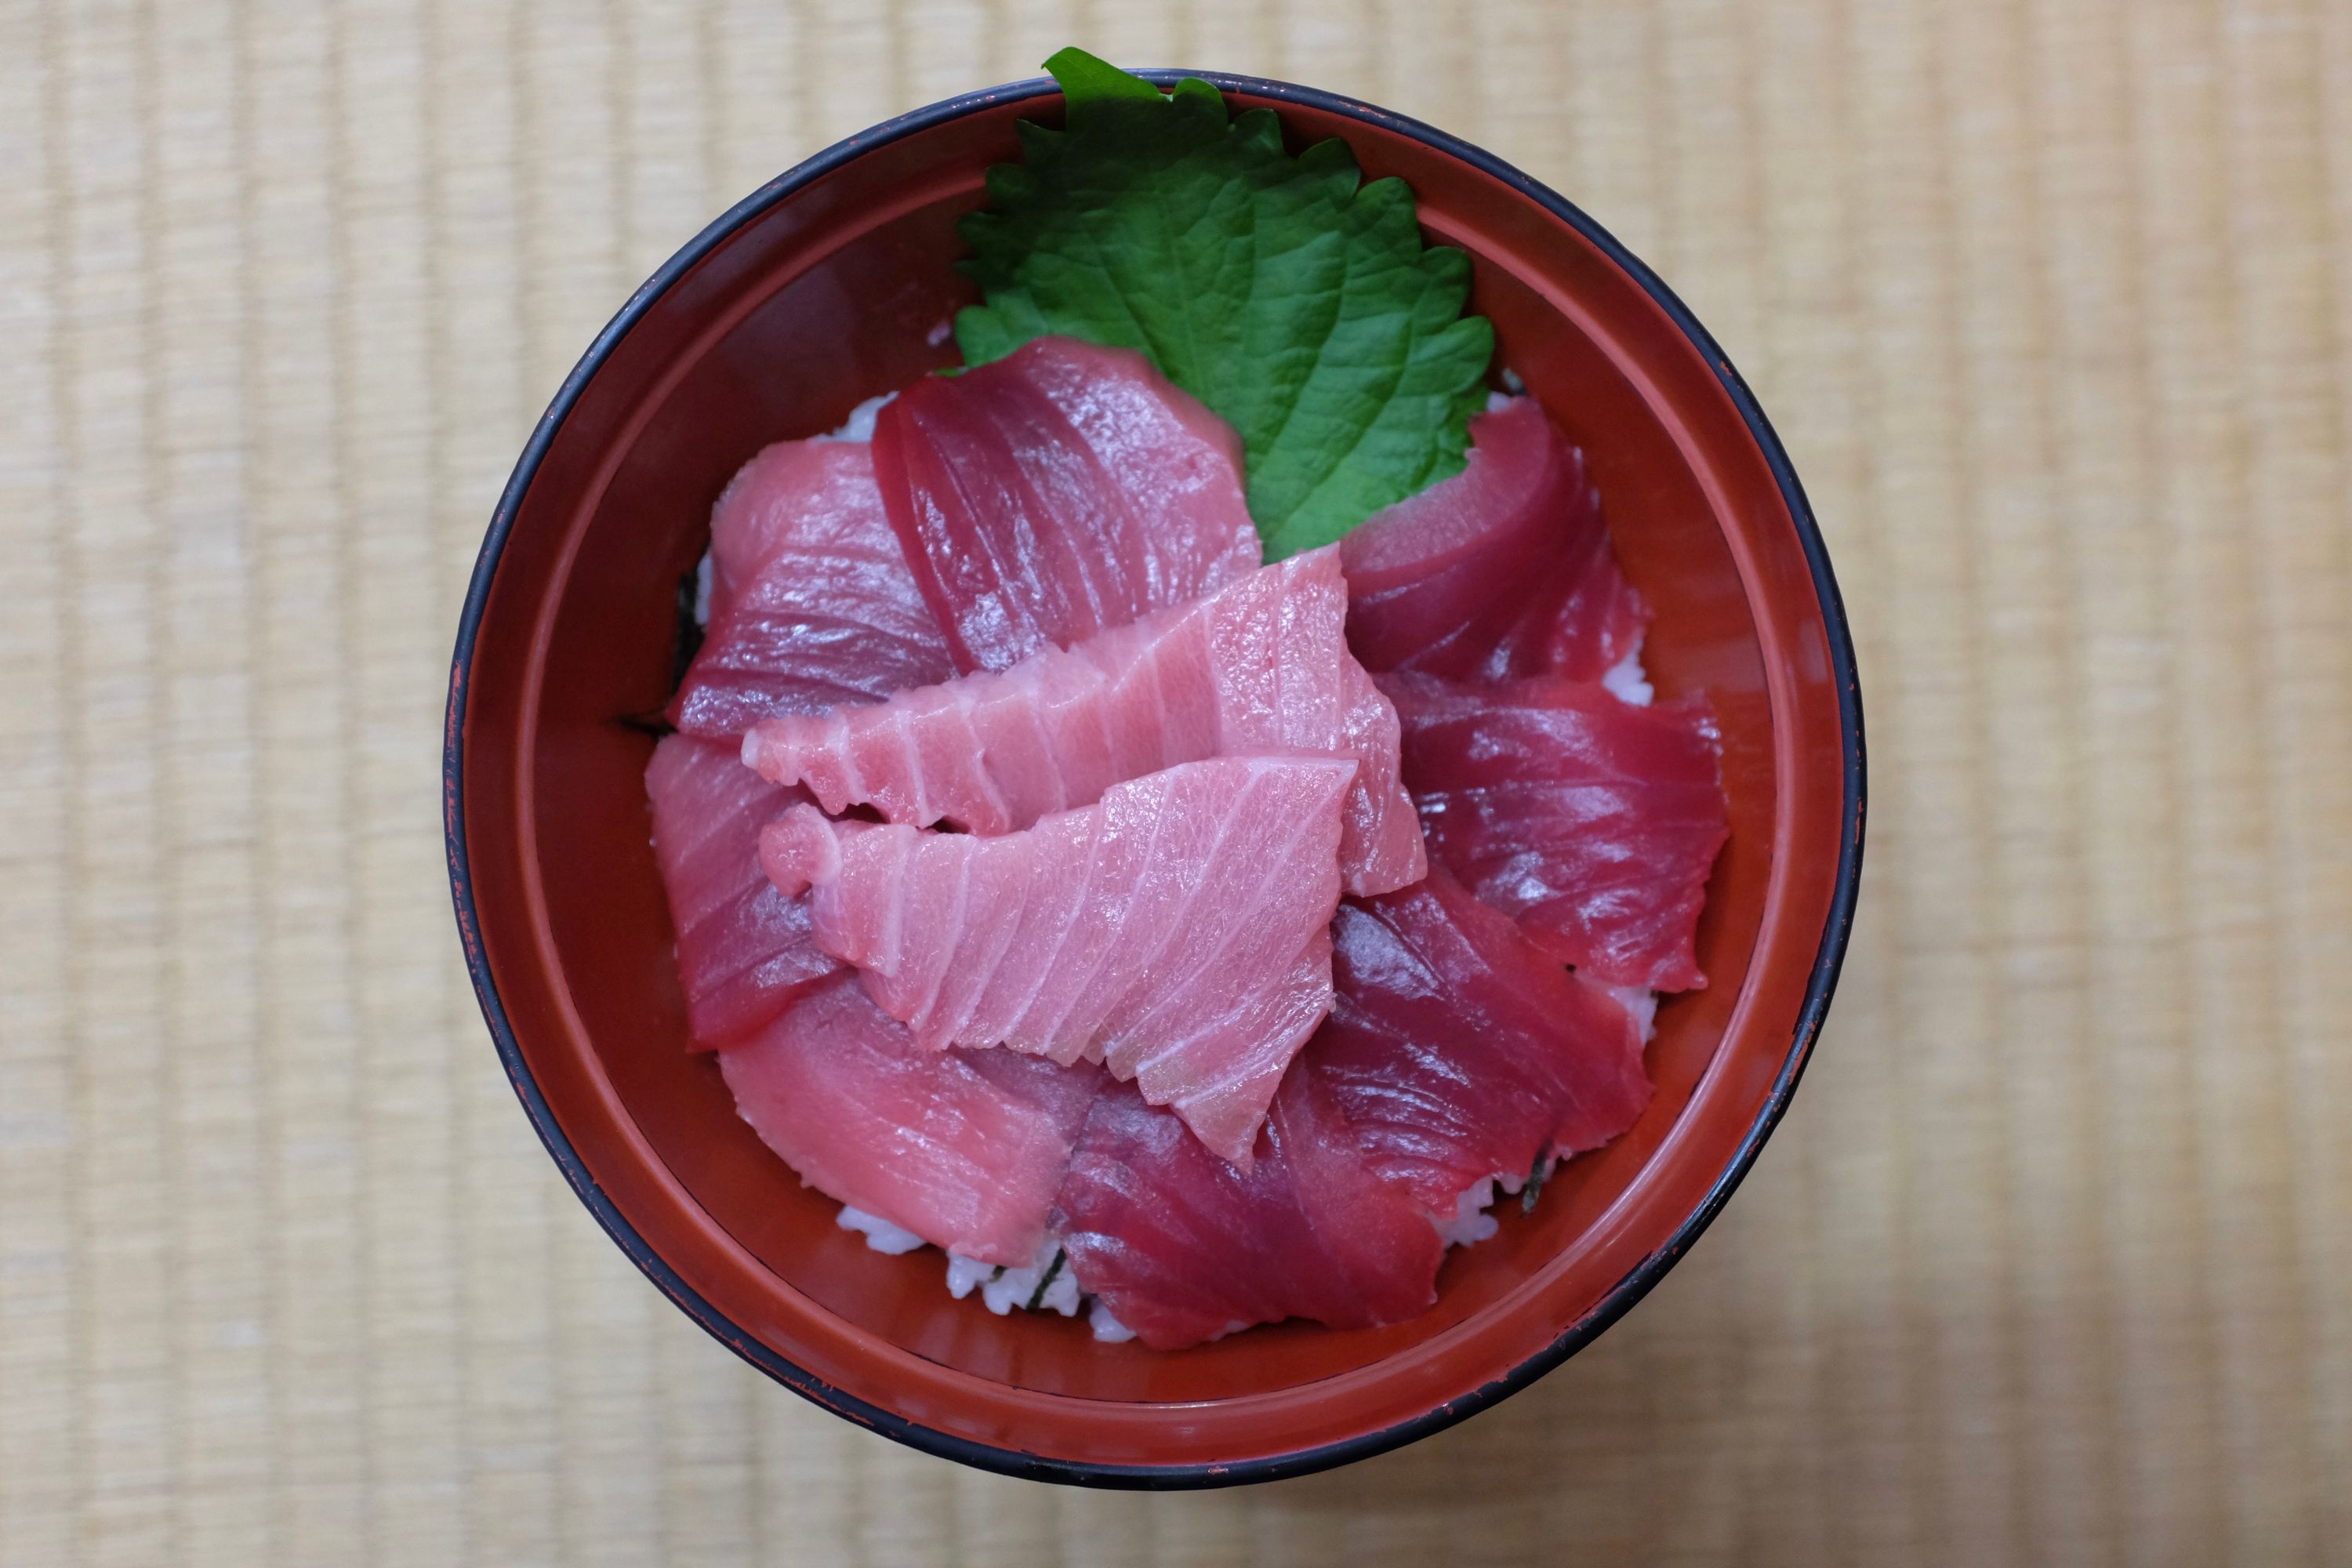 Slices of raw bluefin tuna in a red lacquer bowl, with the different cuts of meat clearly distinguishable by color.